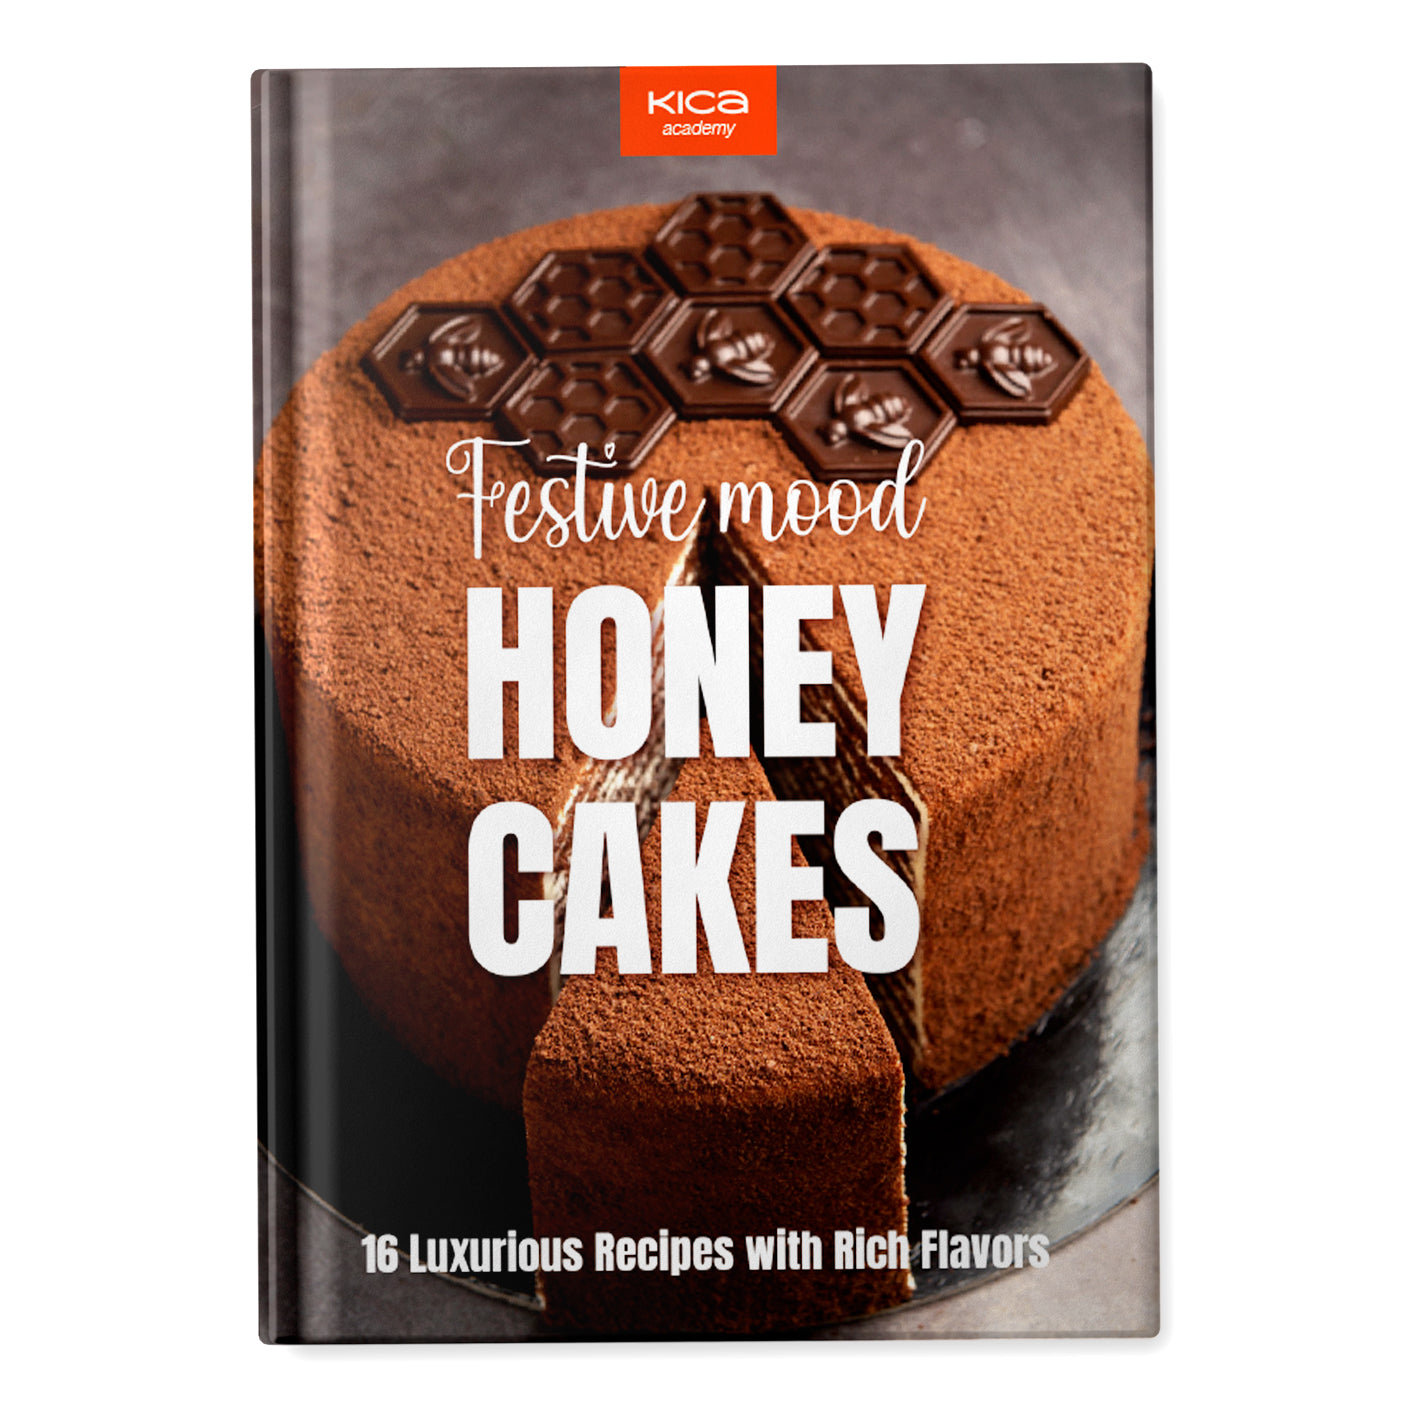 Festive Mood Honey Cakes: 16 Luxurious Recipes With Rich Flavors